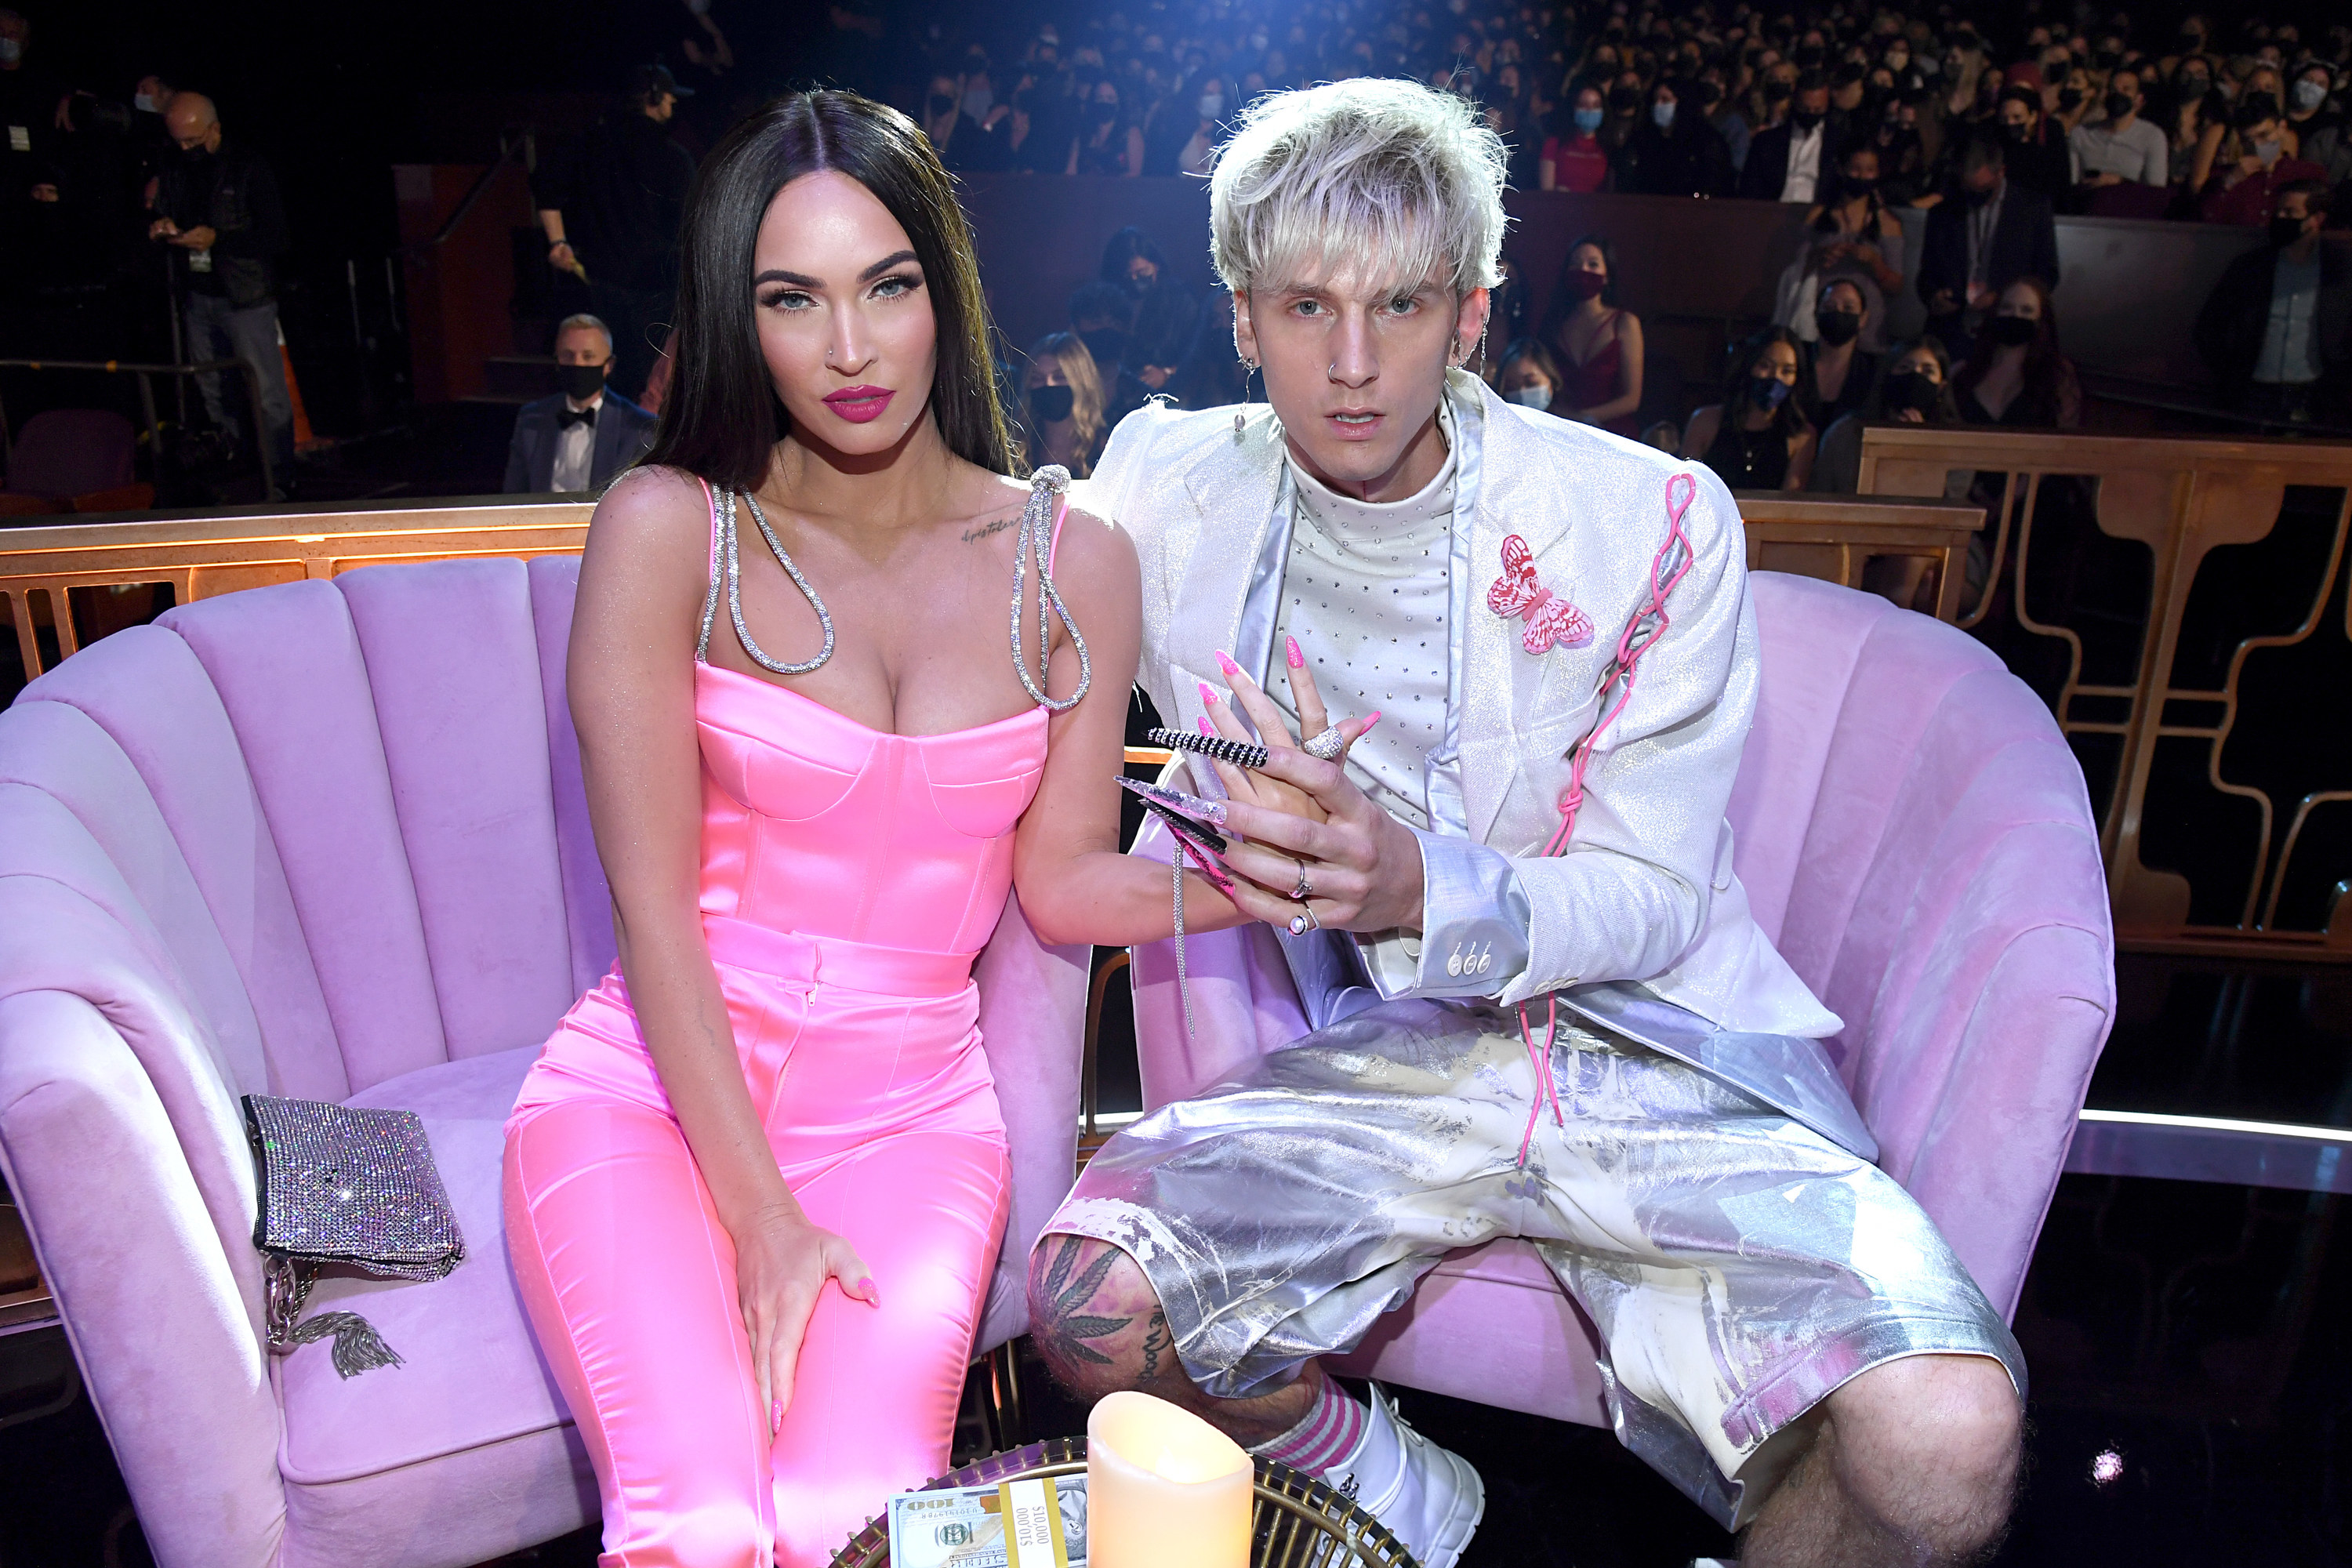 Megan Fox and Machine Gun Kelly attend the 2021 iHeartRadio Music Awards at The Dolby Theatre in Los Angeles, California, which was broadcast live on FOX on May 27, 2021